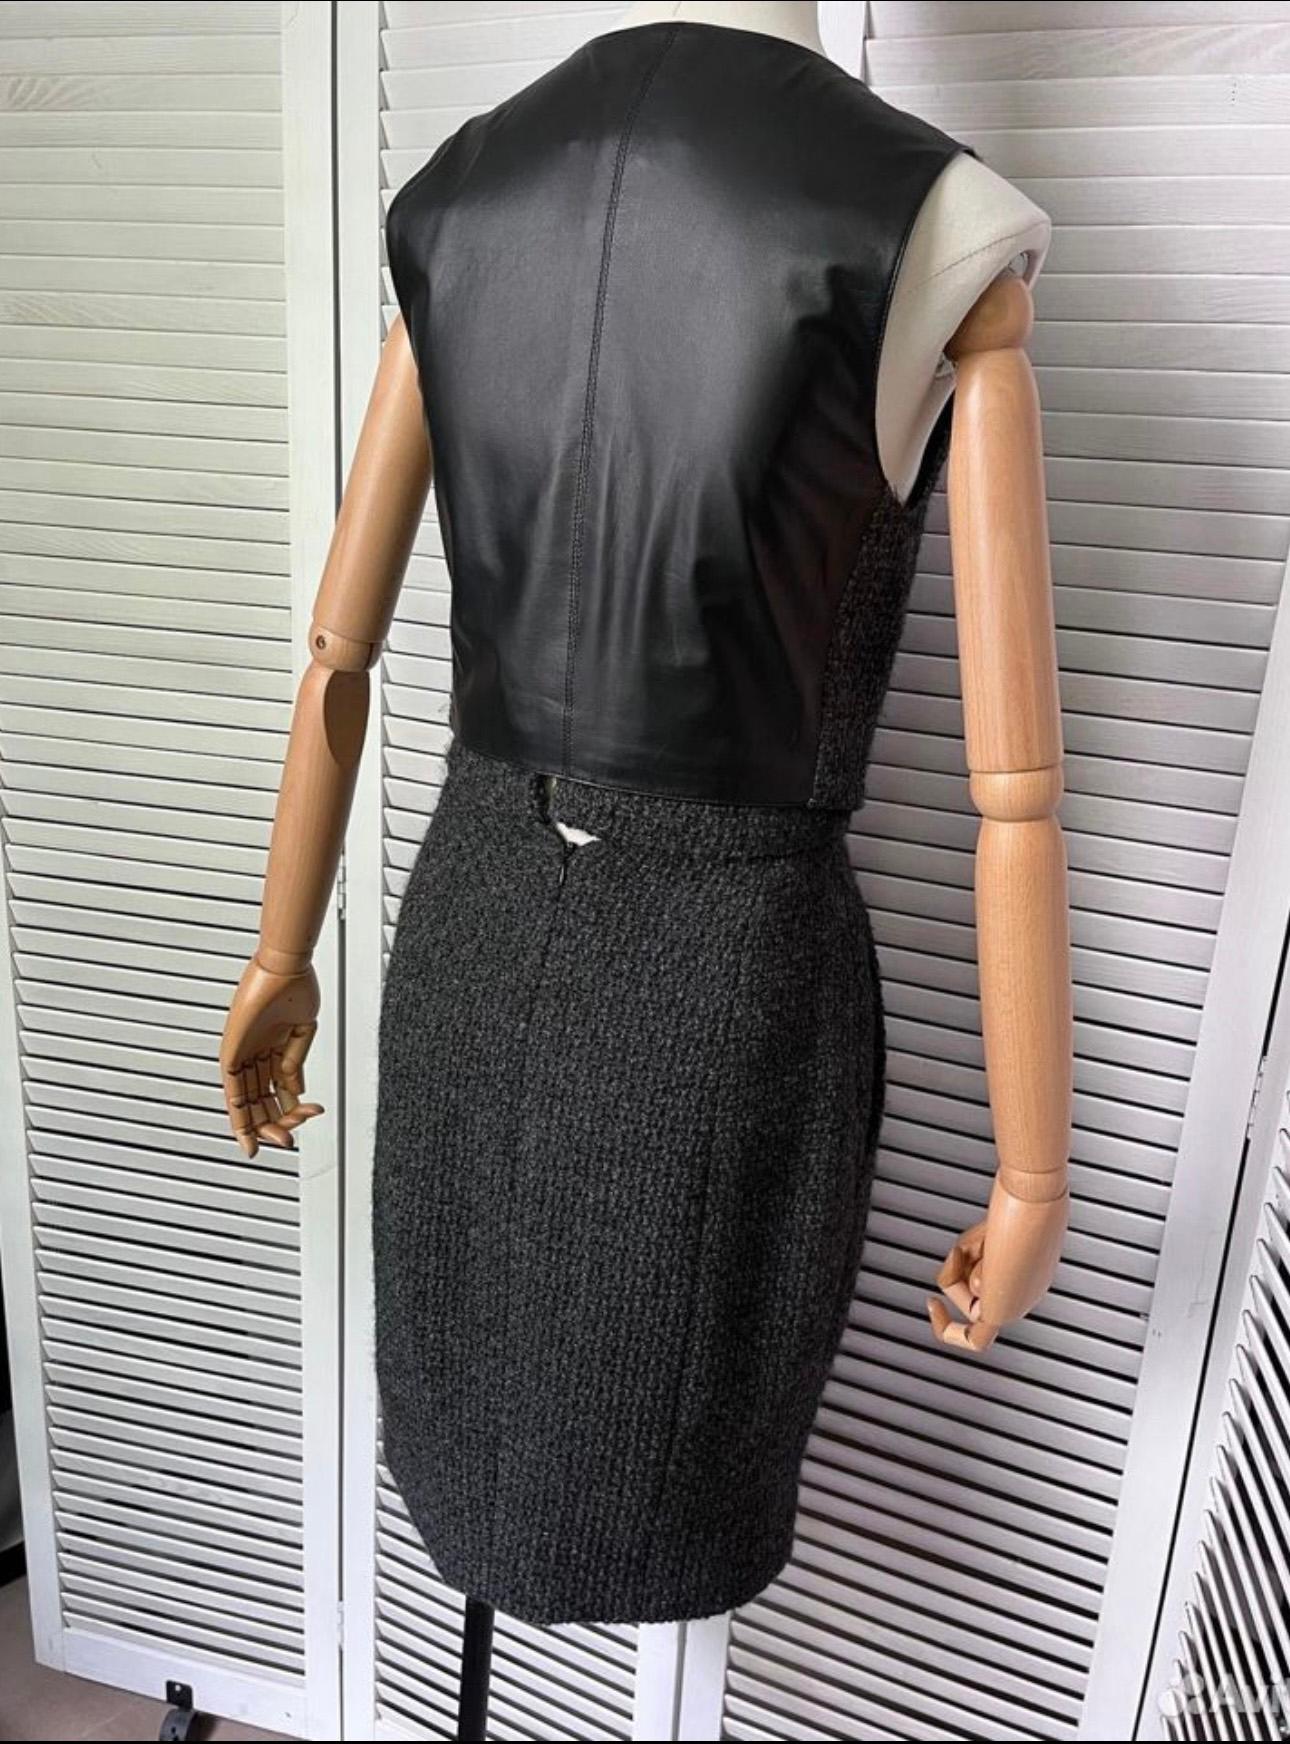 Women's or Men's Chanel New CC Buttons Black Tweed Vest and Skirt Ensemble